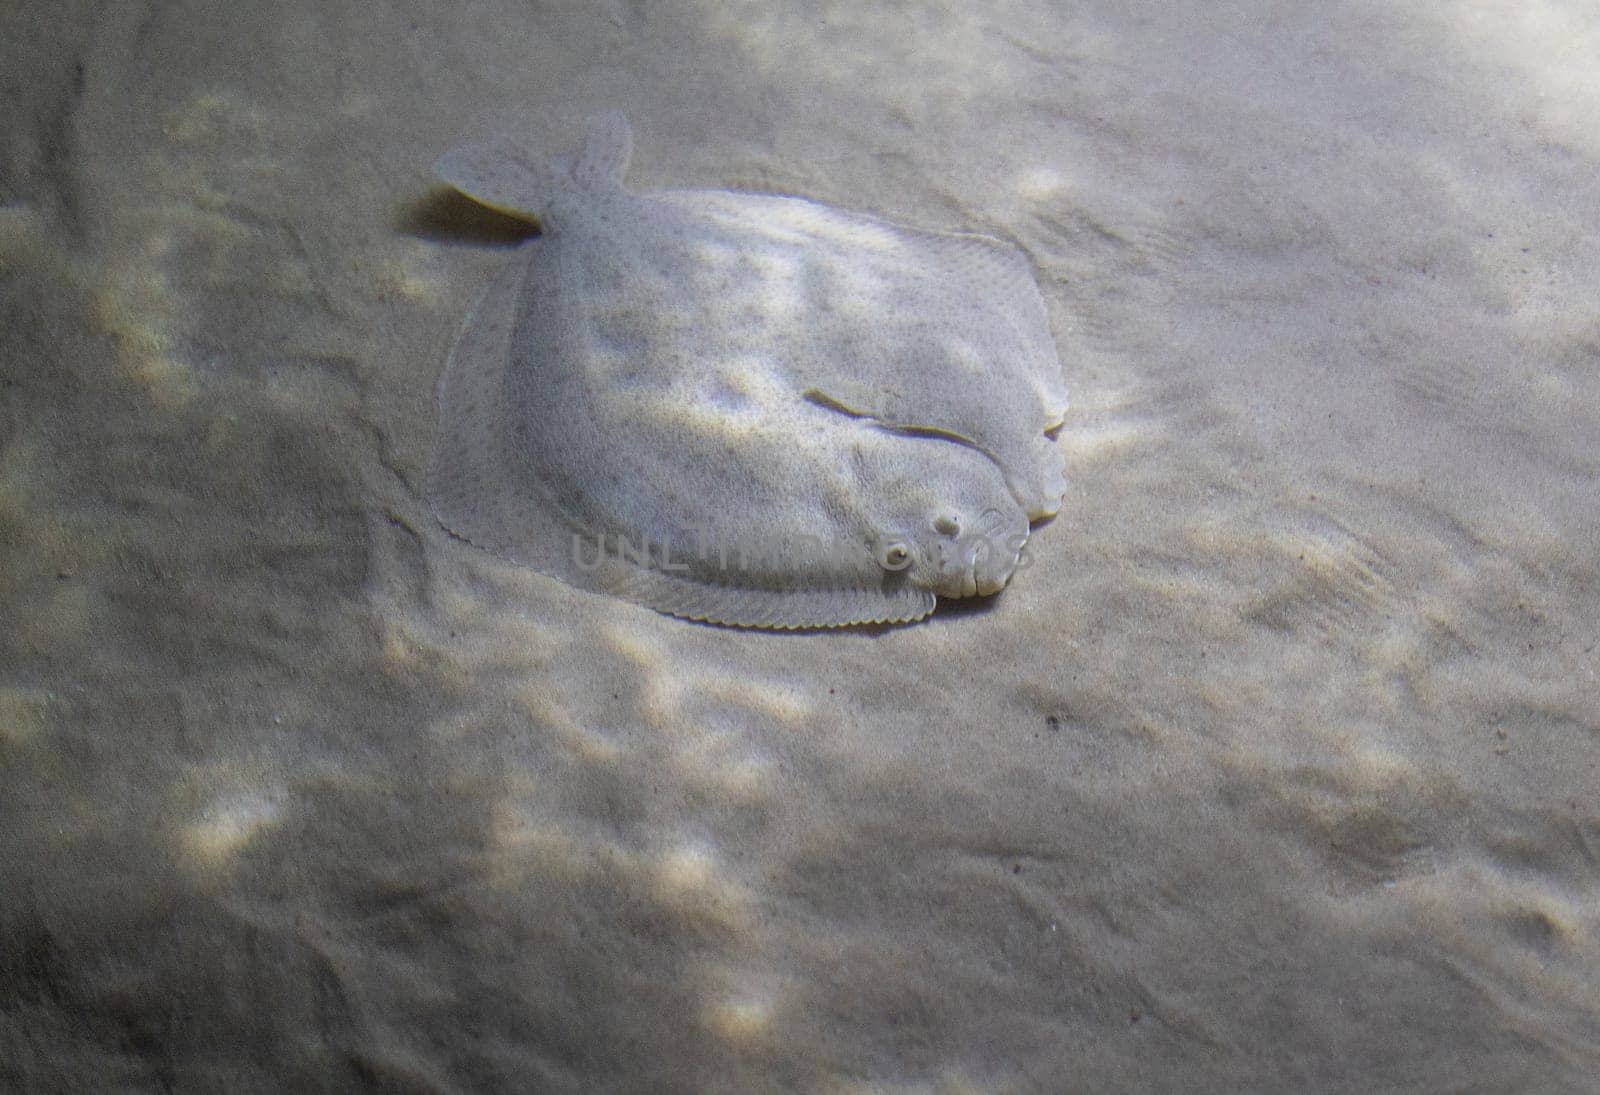 A fish flounder is laying on the sand. The fish is small and has a white belly